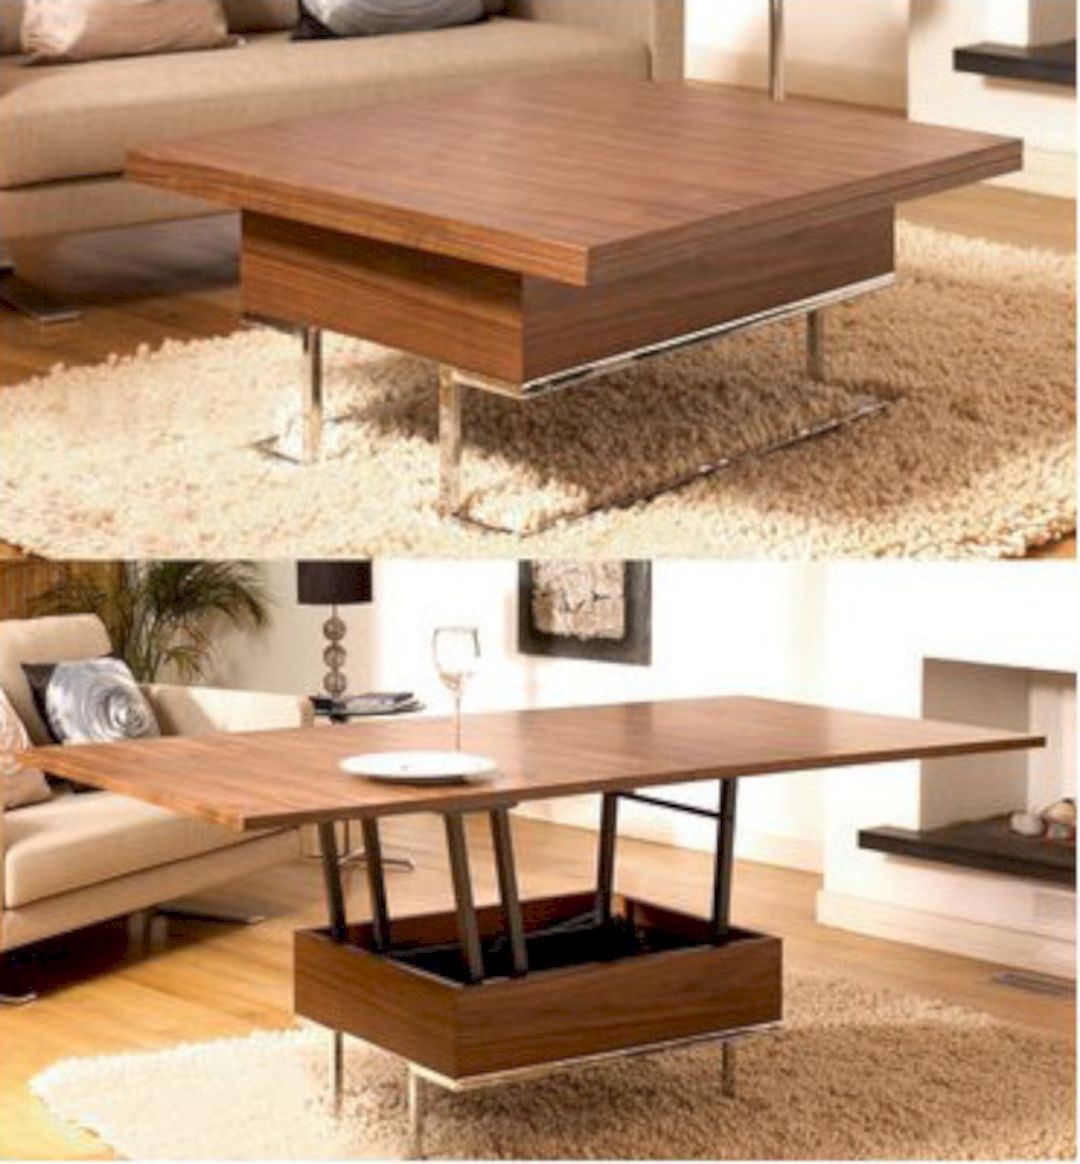 50 Amazing Convertible Coffee Table To, Turn Dining Room Table Into Coffee